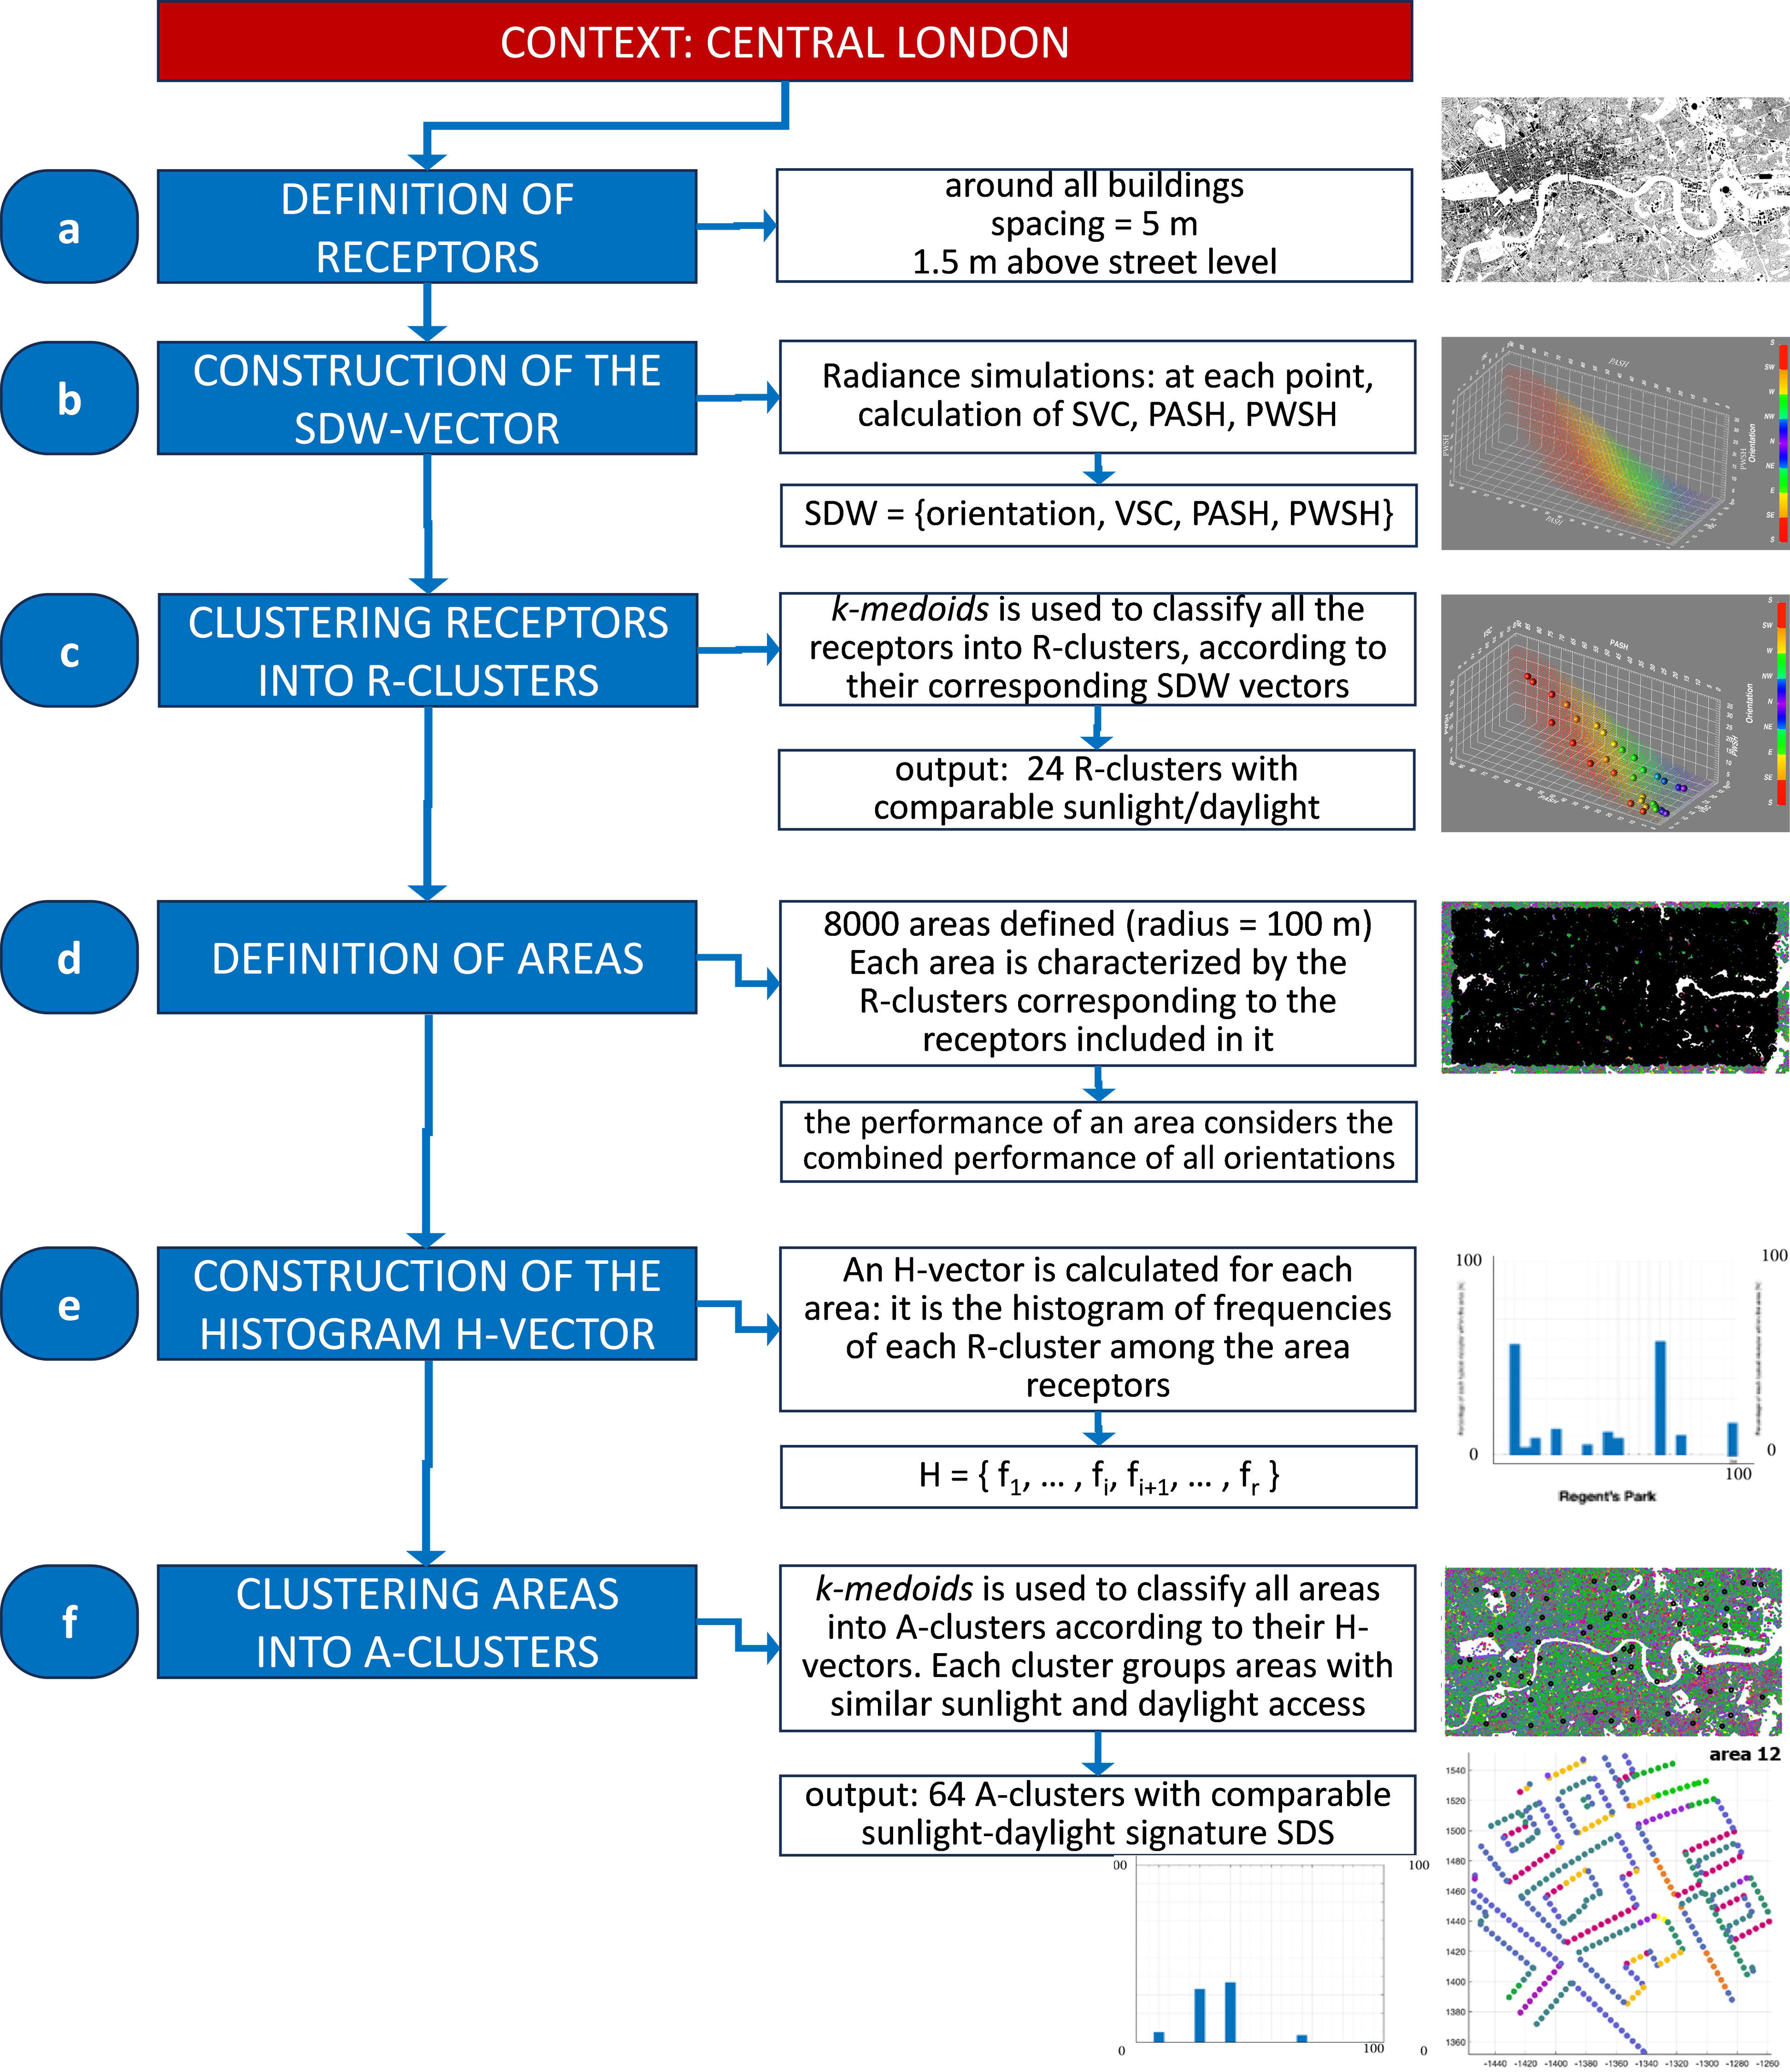 Workflow of the process for the clustering into areas with a comparable sunlight-daylight signature SDS, applied to the case-study of Central London.